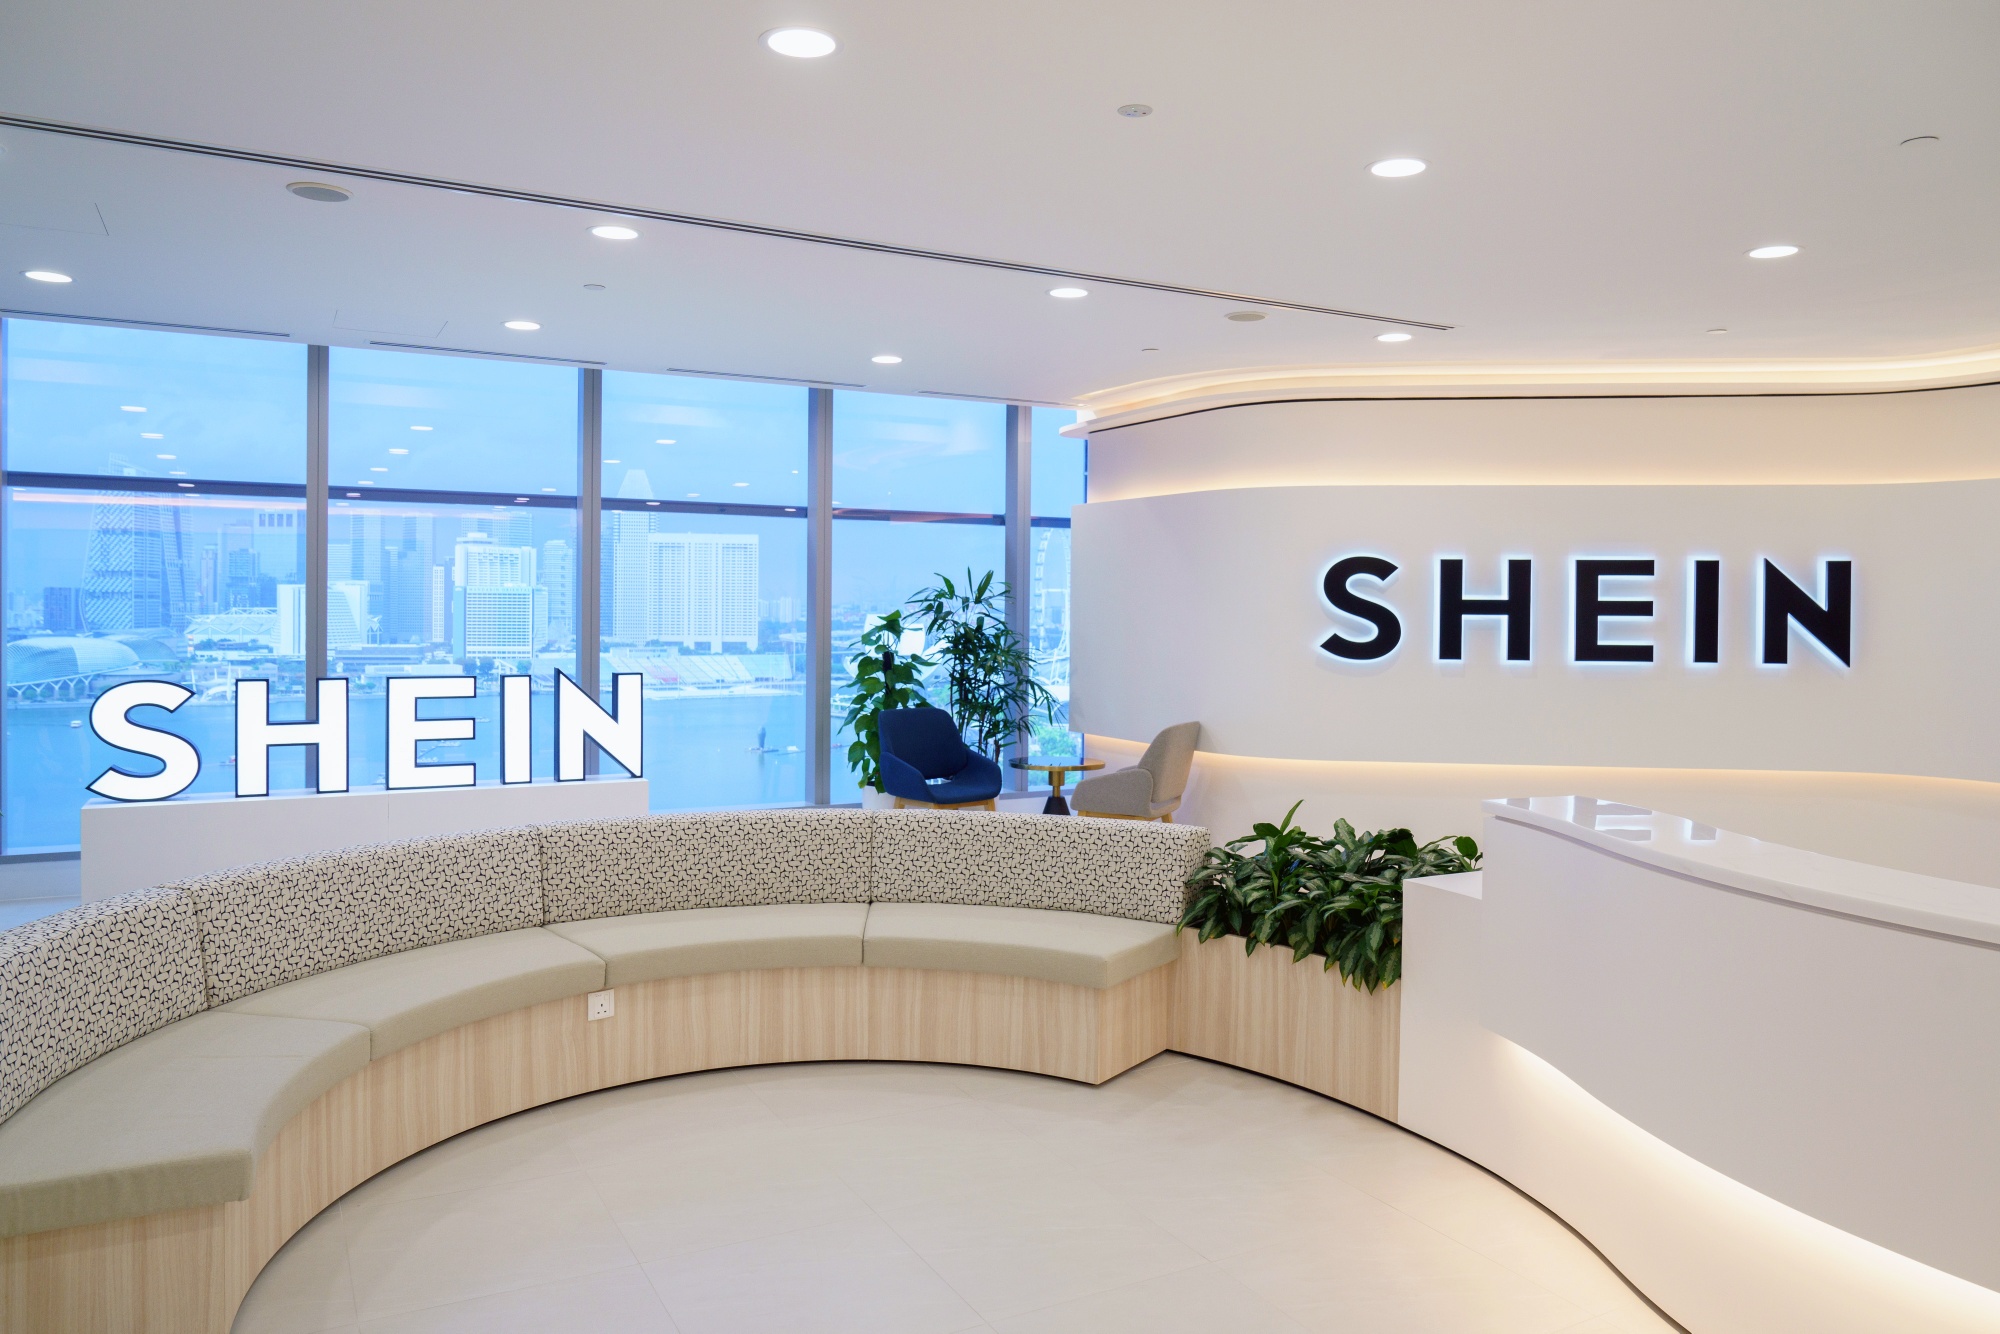 Shein Is Set To Face EU Scrutiny Under Digital Services Act - Bloomberg